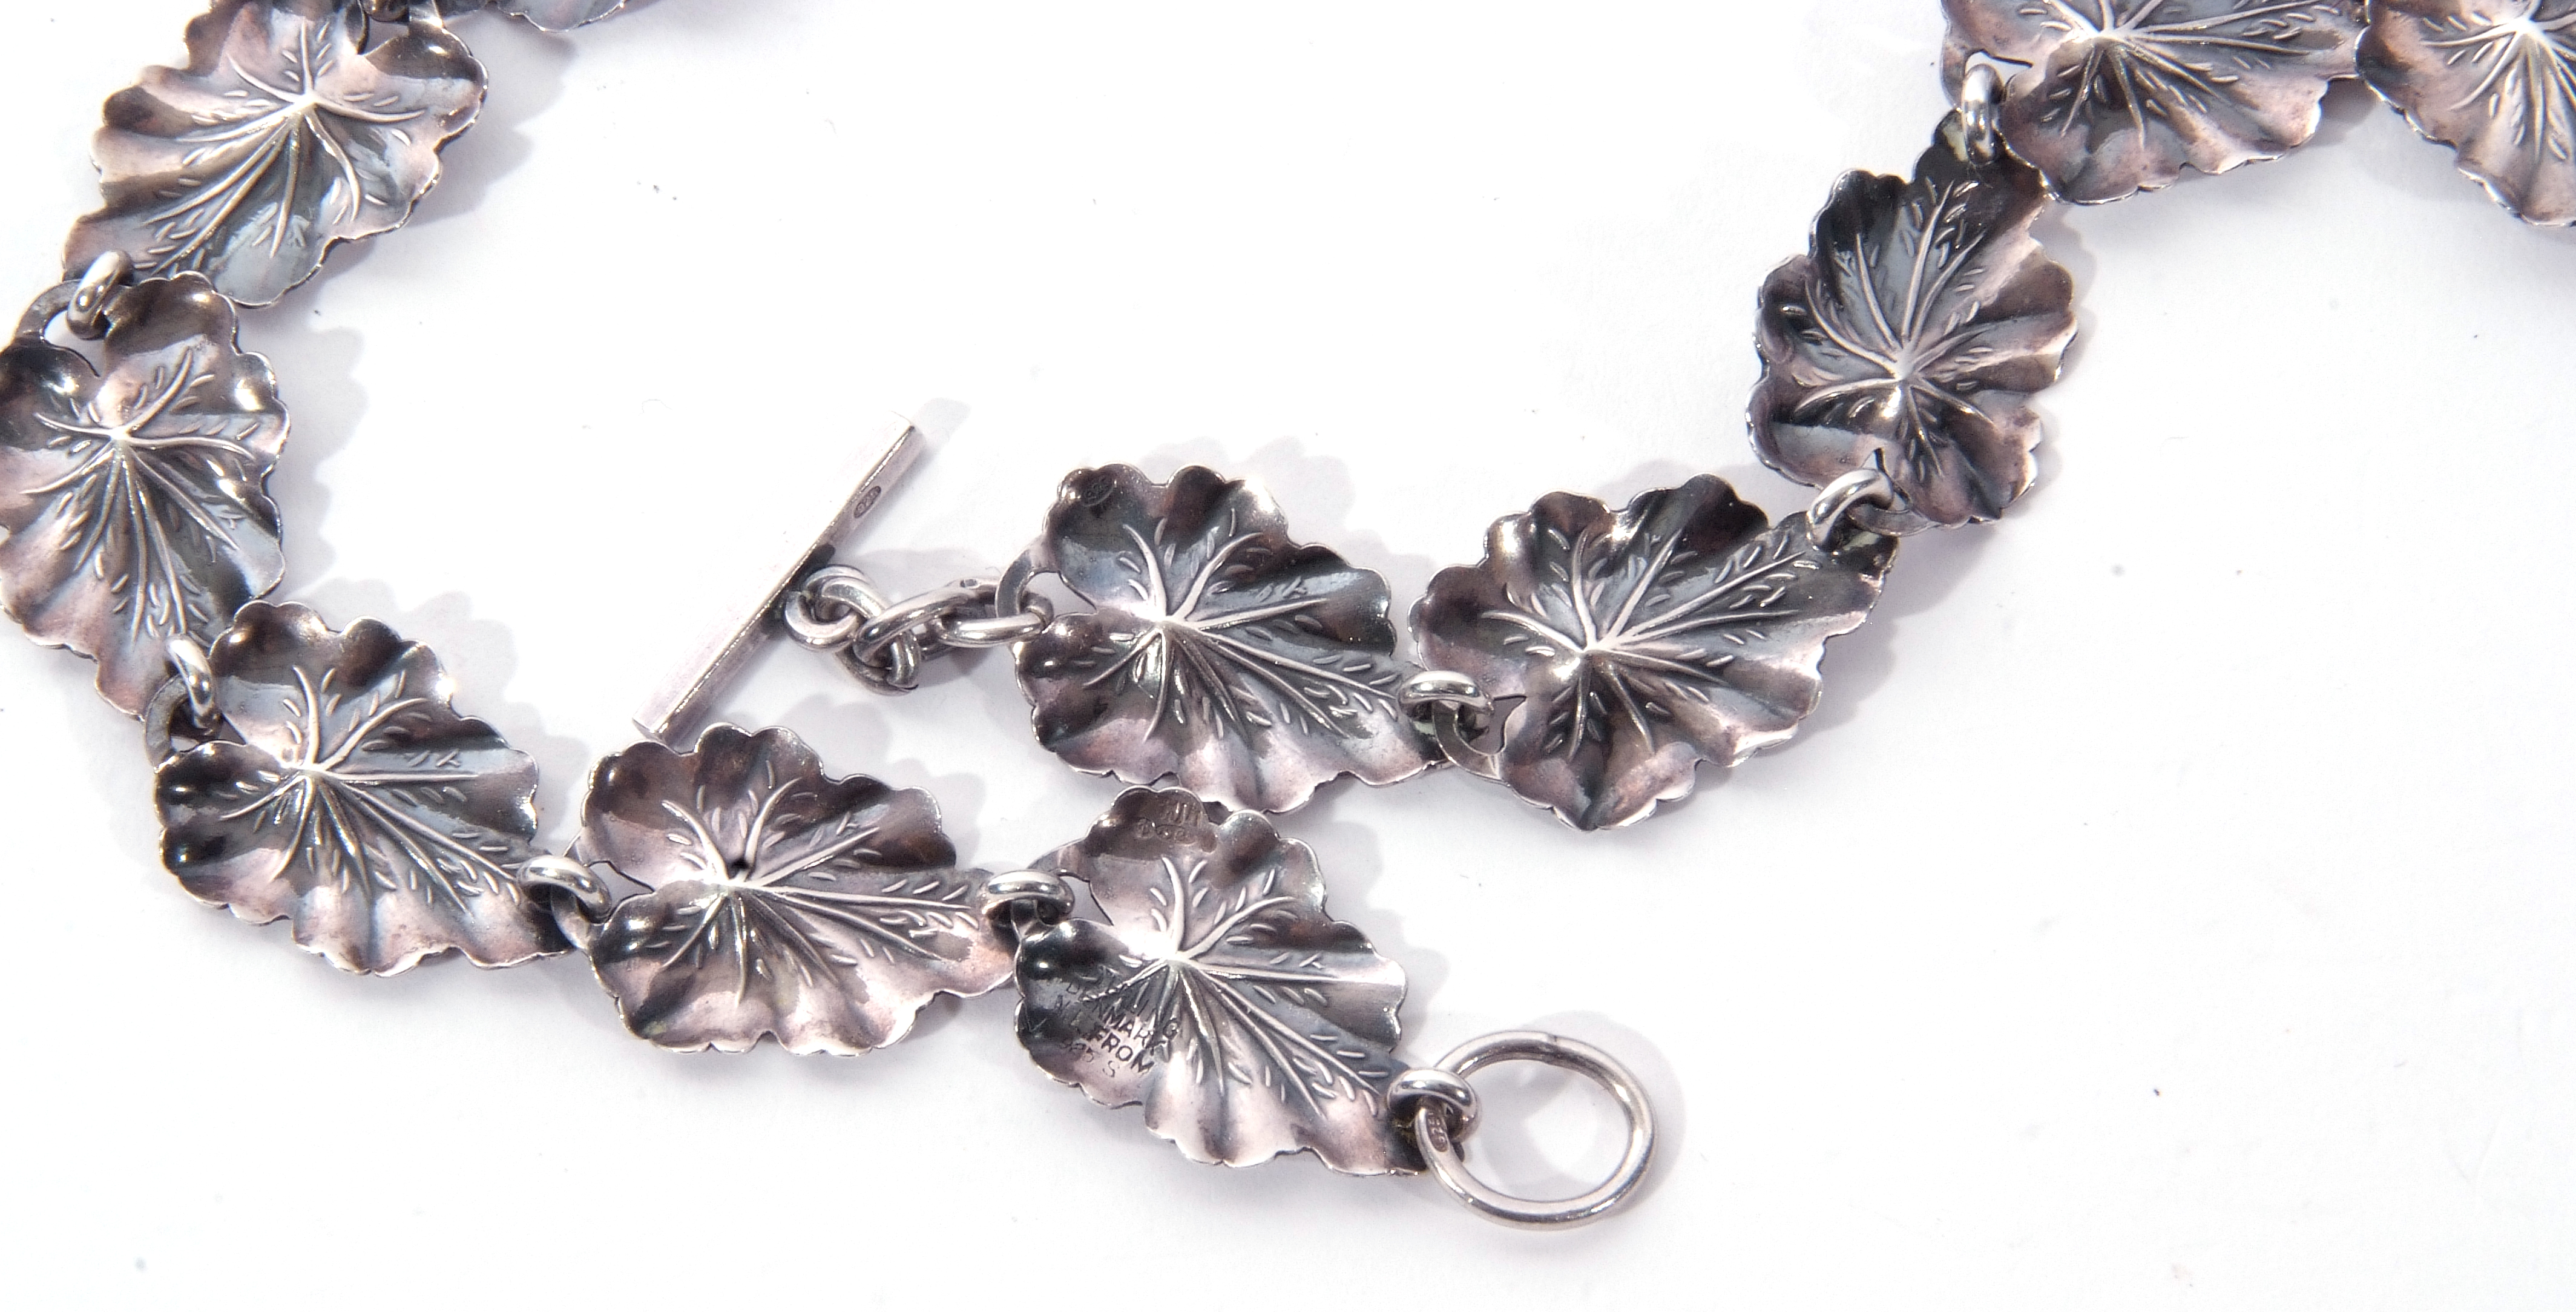 Danish sterling N E From necklace: a design featuring nineteen articulated pressed leaf design - Image 5 of 5